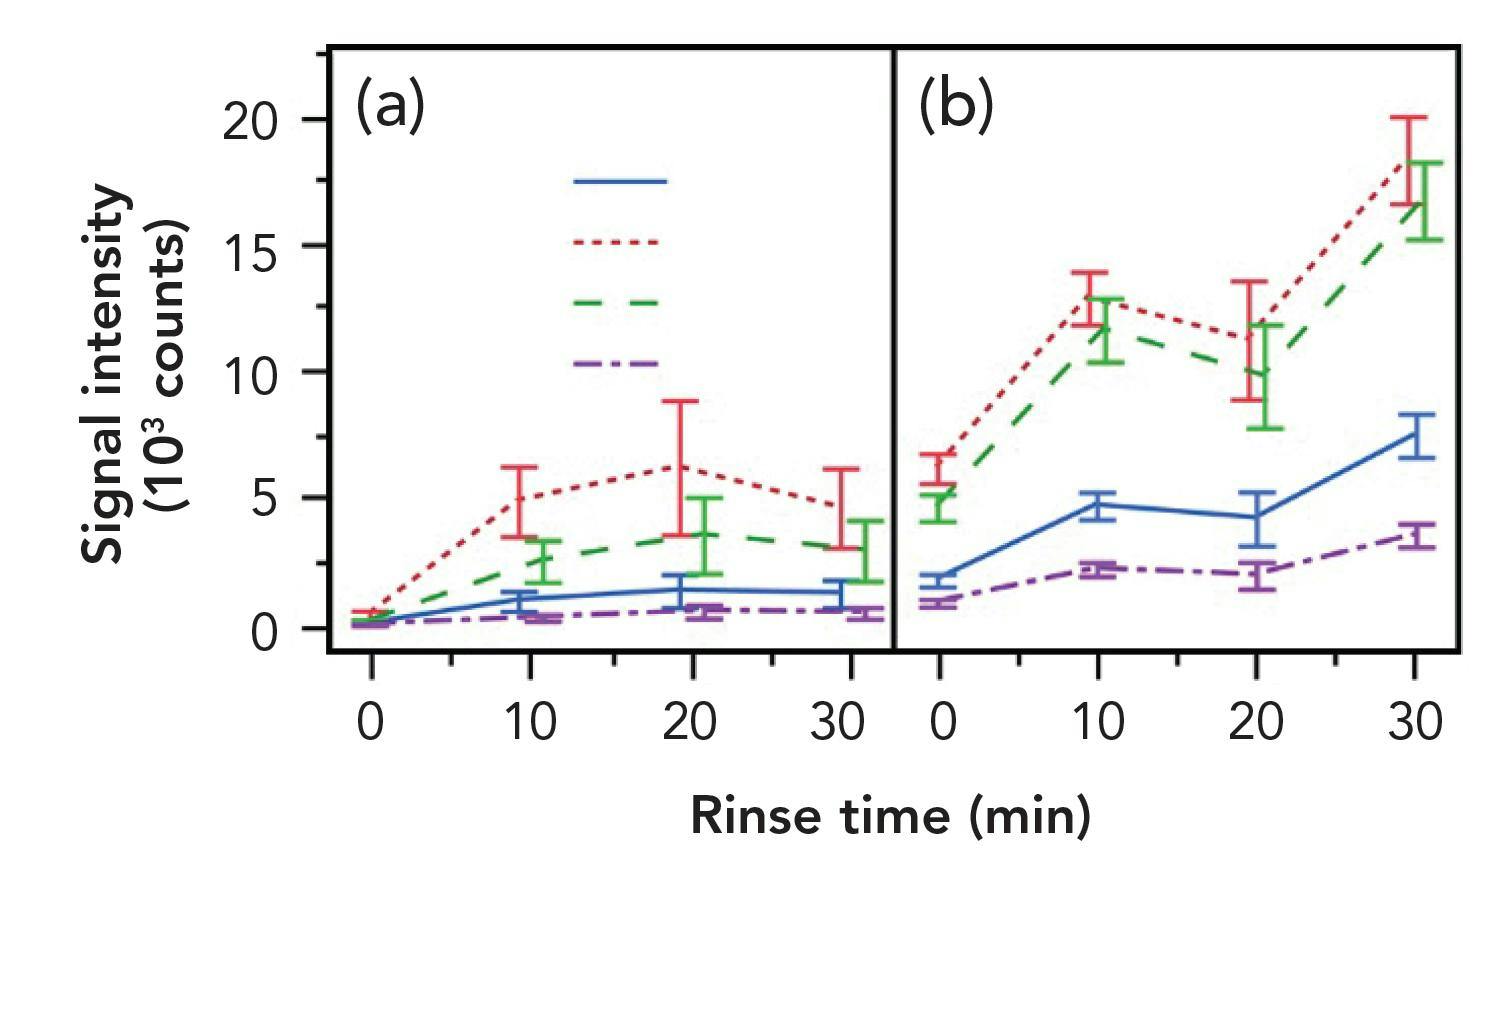 Figure 5: (a) Rinsing or (b) diluting samples are both effective in increasing the signal associated with the phenols of interest by reducing the impact of sugars, acids, and other juice components.